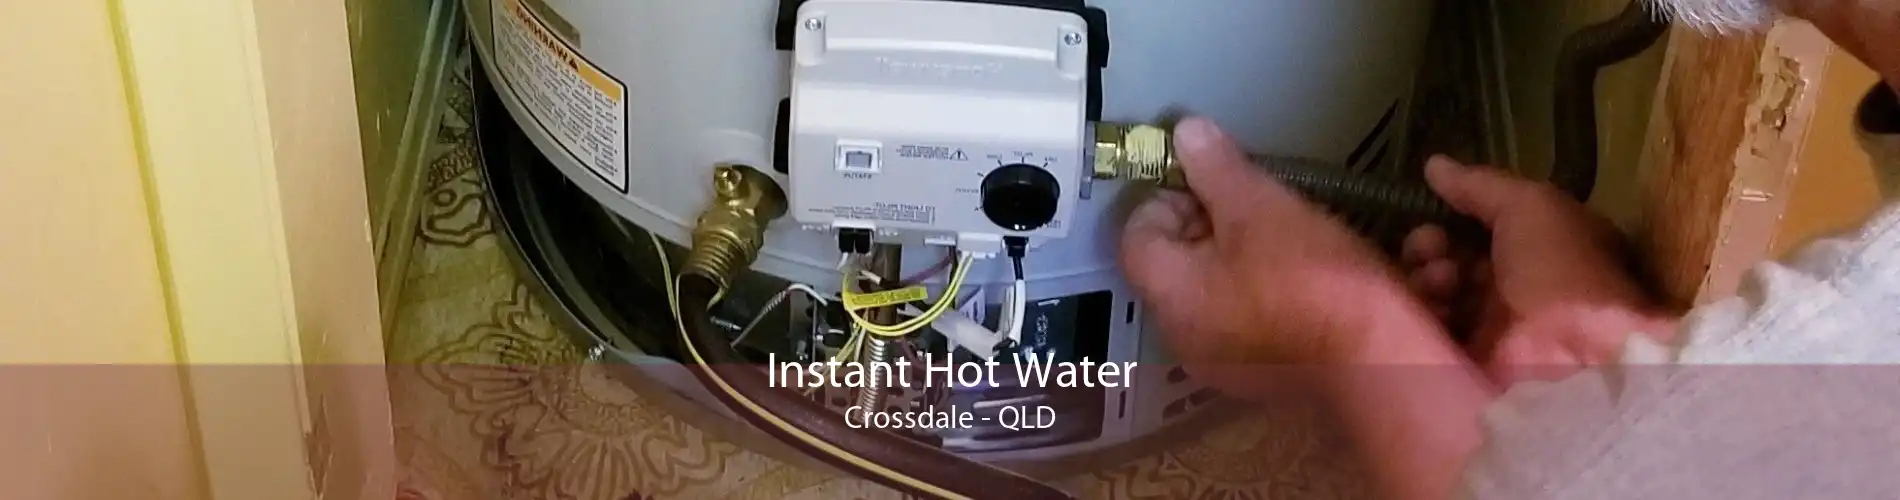 Instant Hot Water Crossdale - QLD